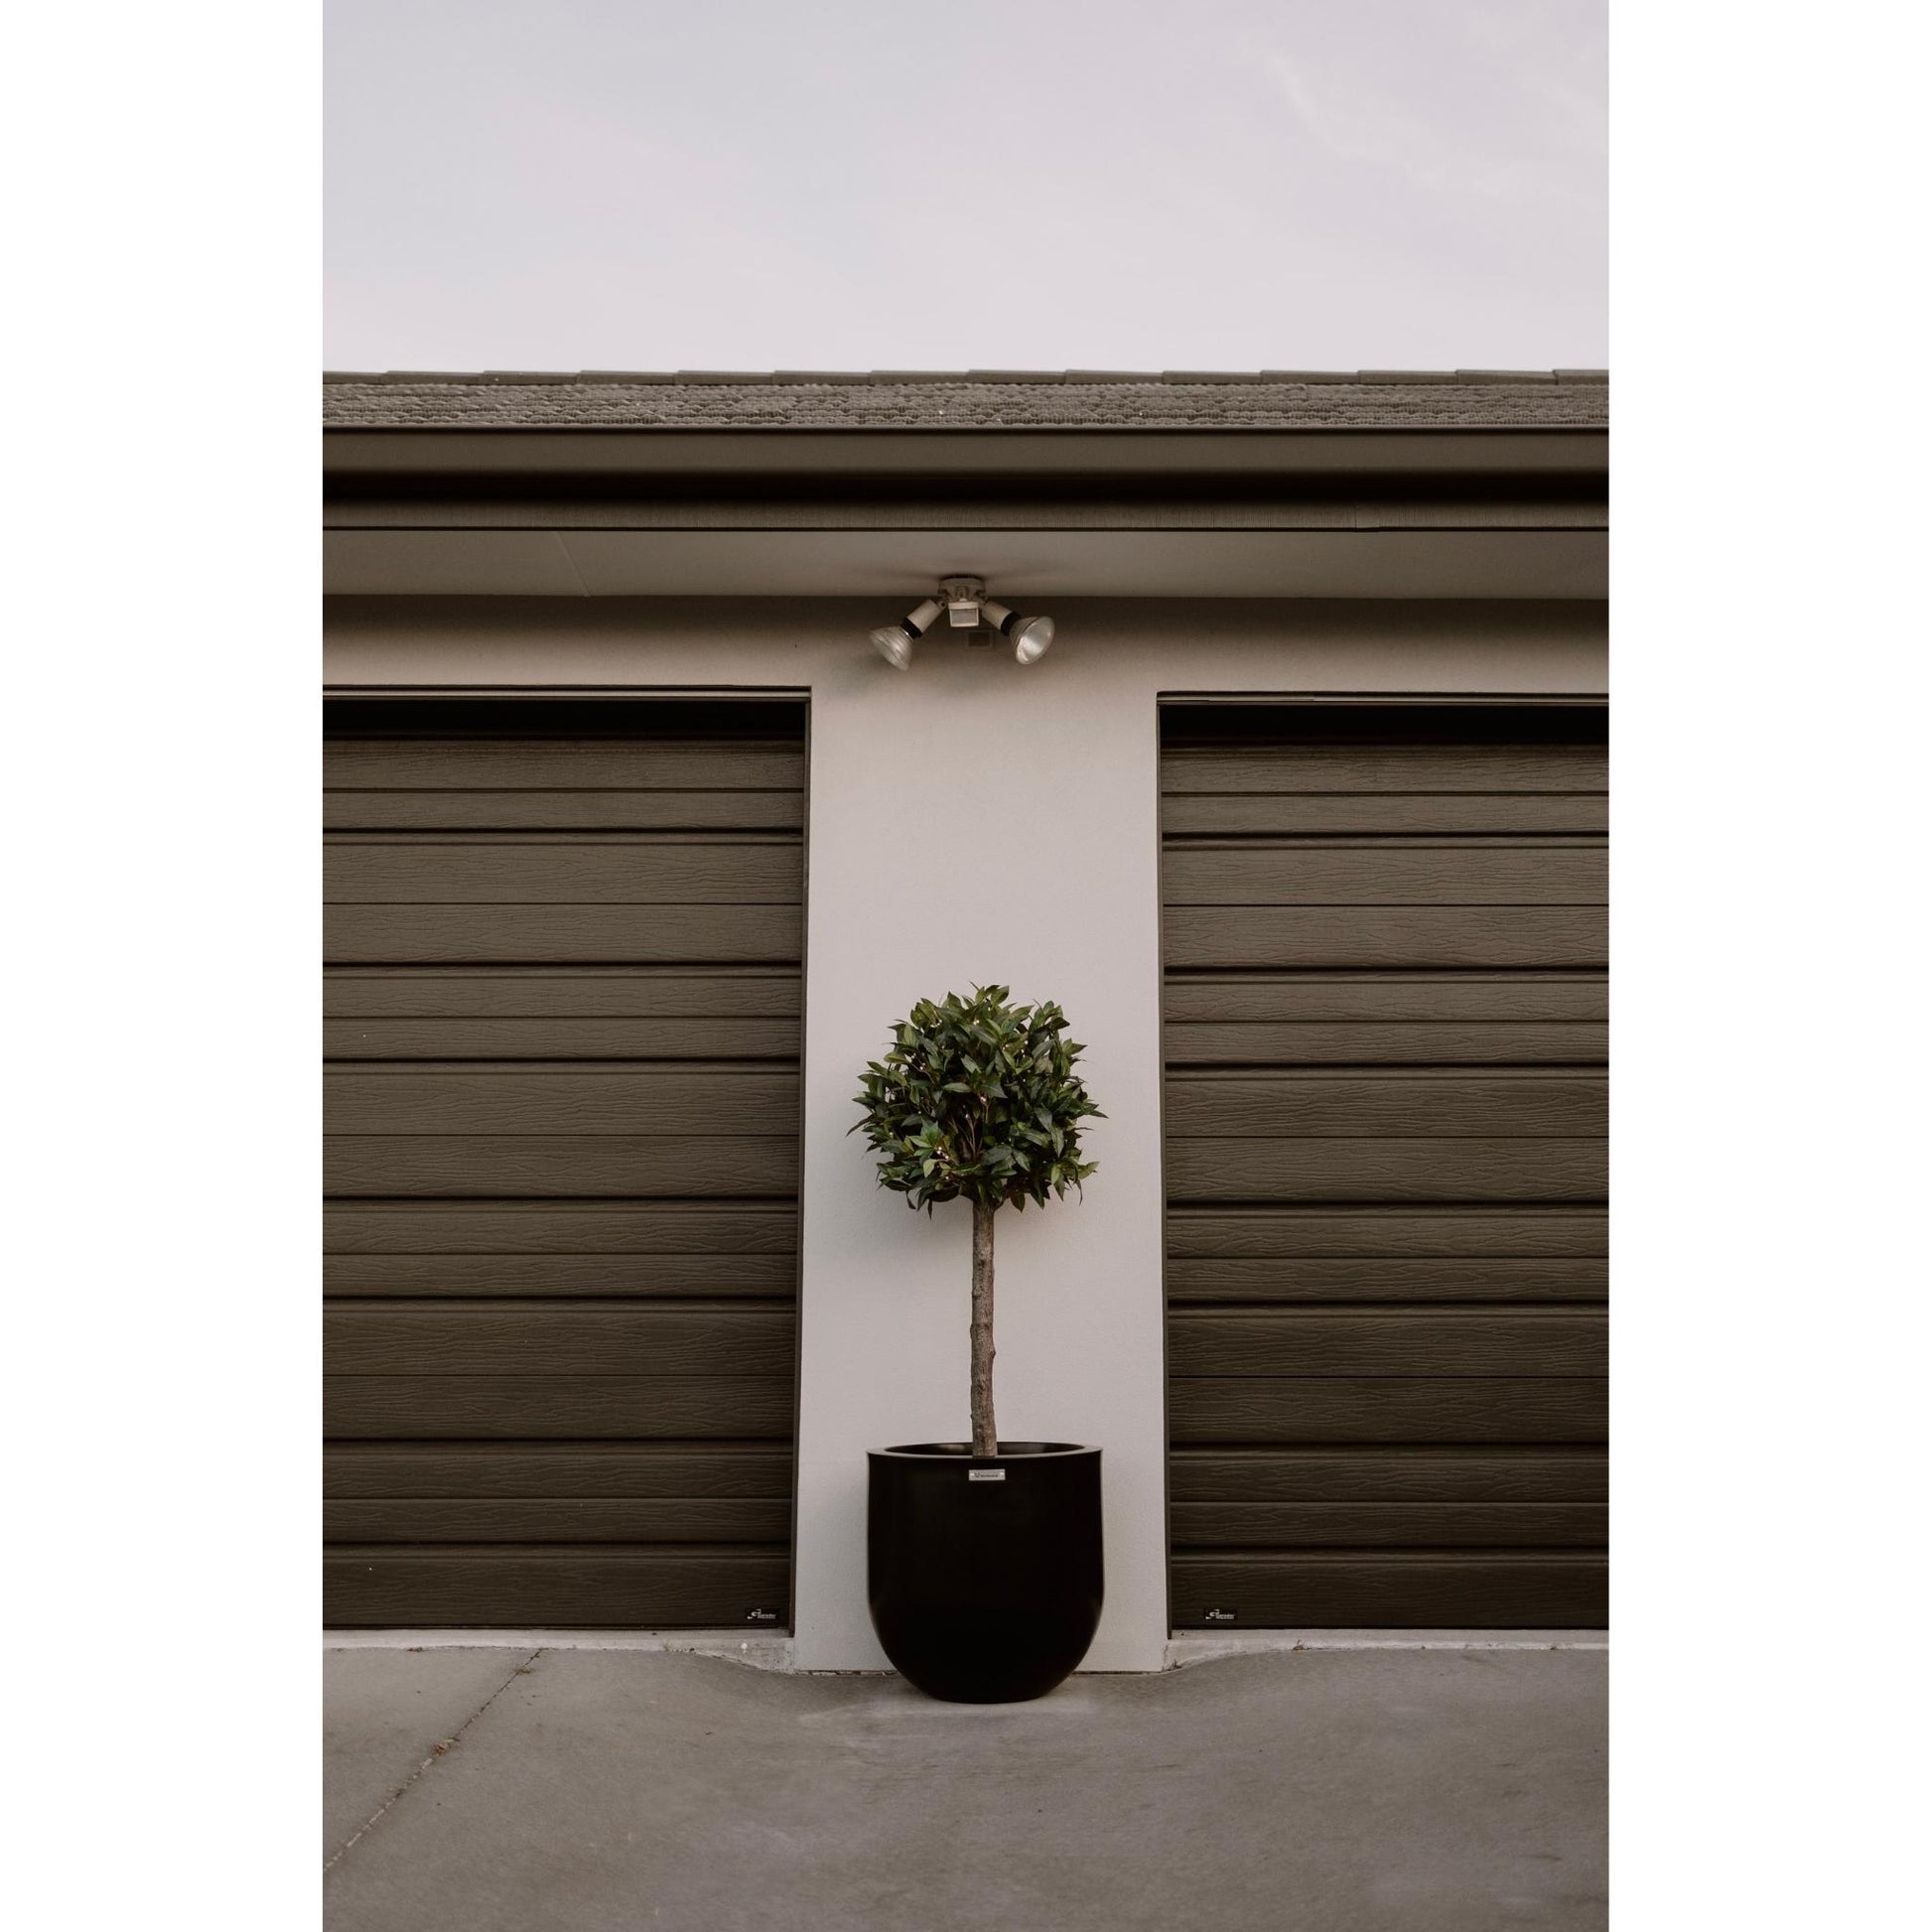 A black Modscene planter pot in front of a house planted with a bay tree.